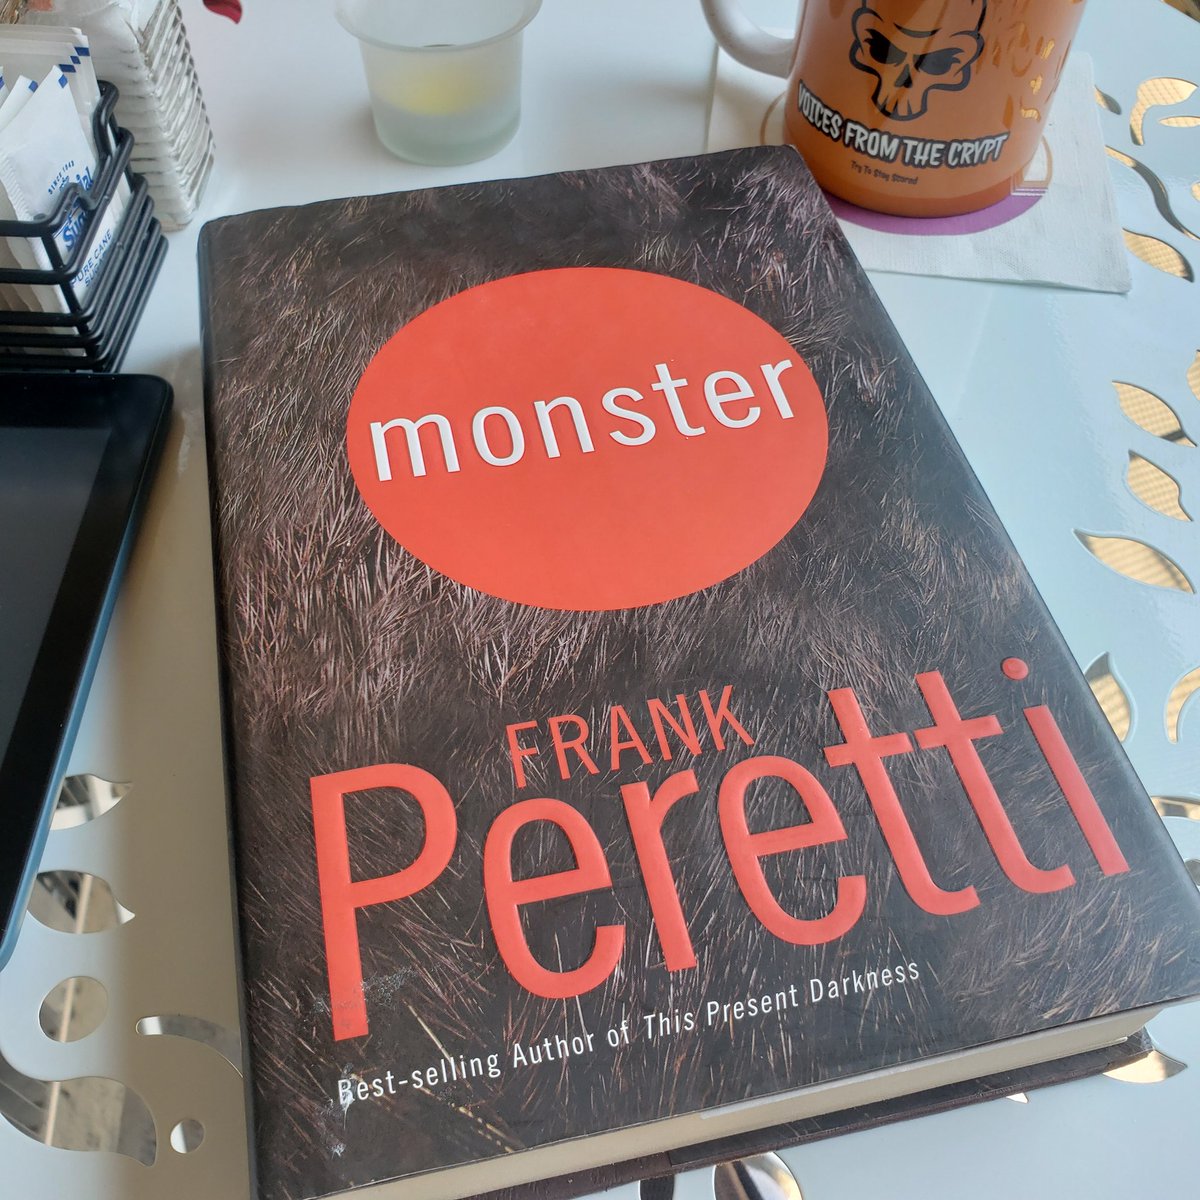 Some weekend reading. 📚 I've always enjoyed stories about Bigfoot. 👹
#weekendreading #bigfoot #frankperetti #monster